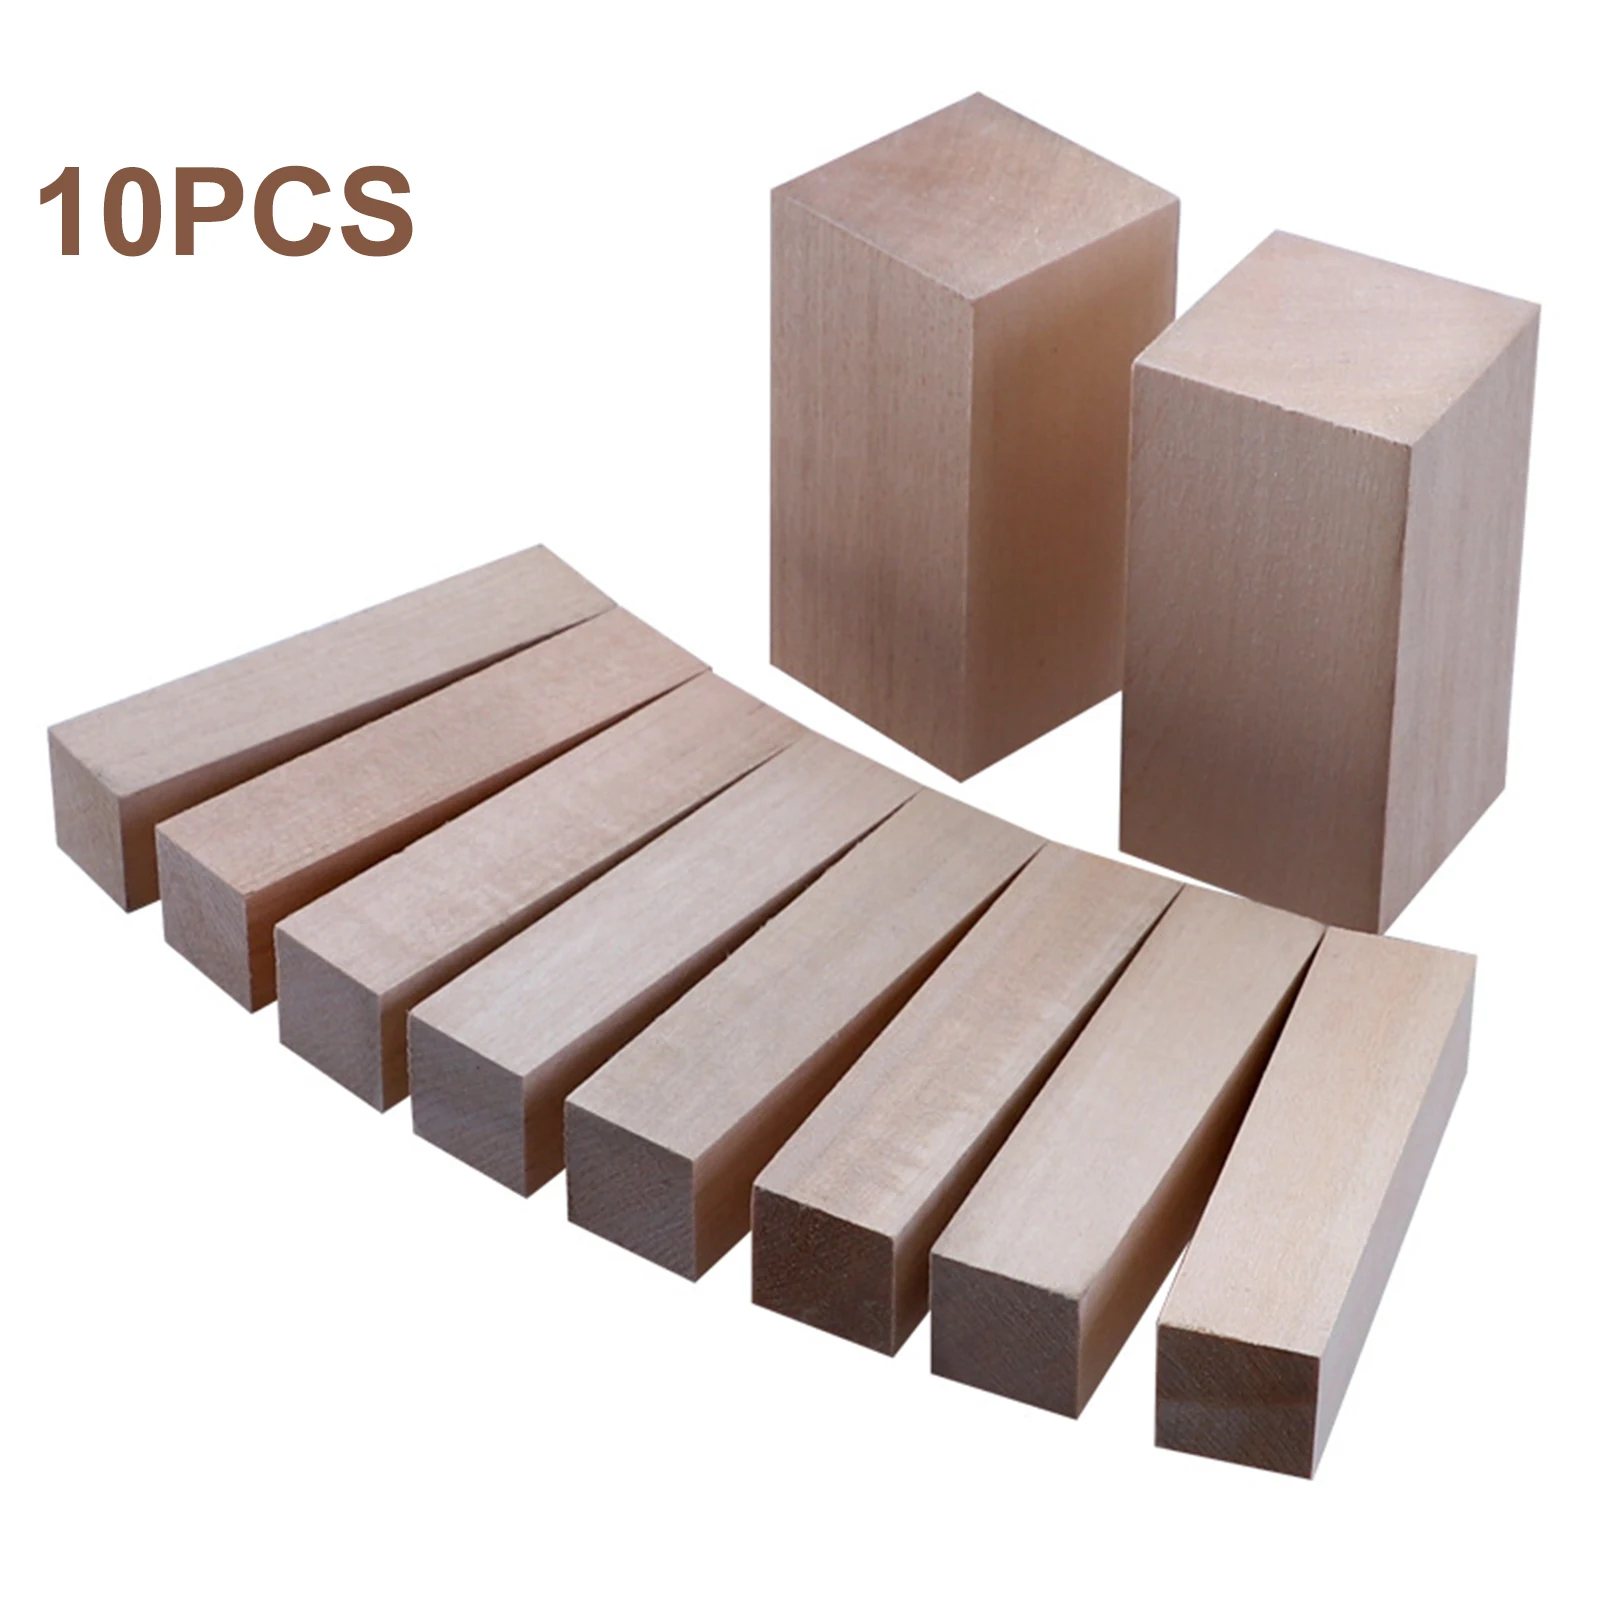 

10pcs Expert Basswood Carving Block Art Project Whittling Unfinished Smooth 2 Sizes Shaping DIY Craft Kids Adults Beginner